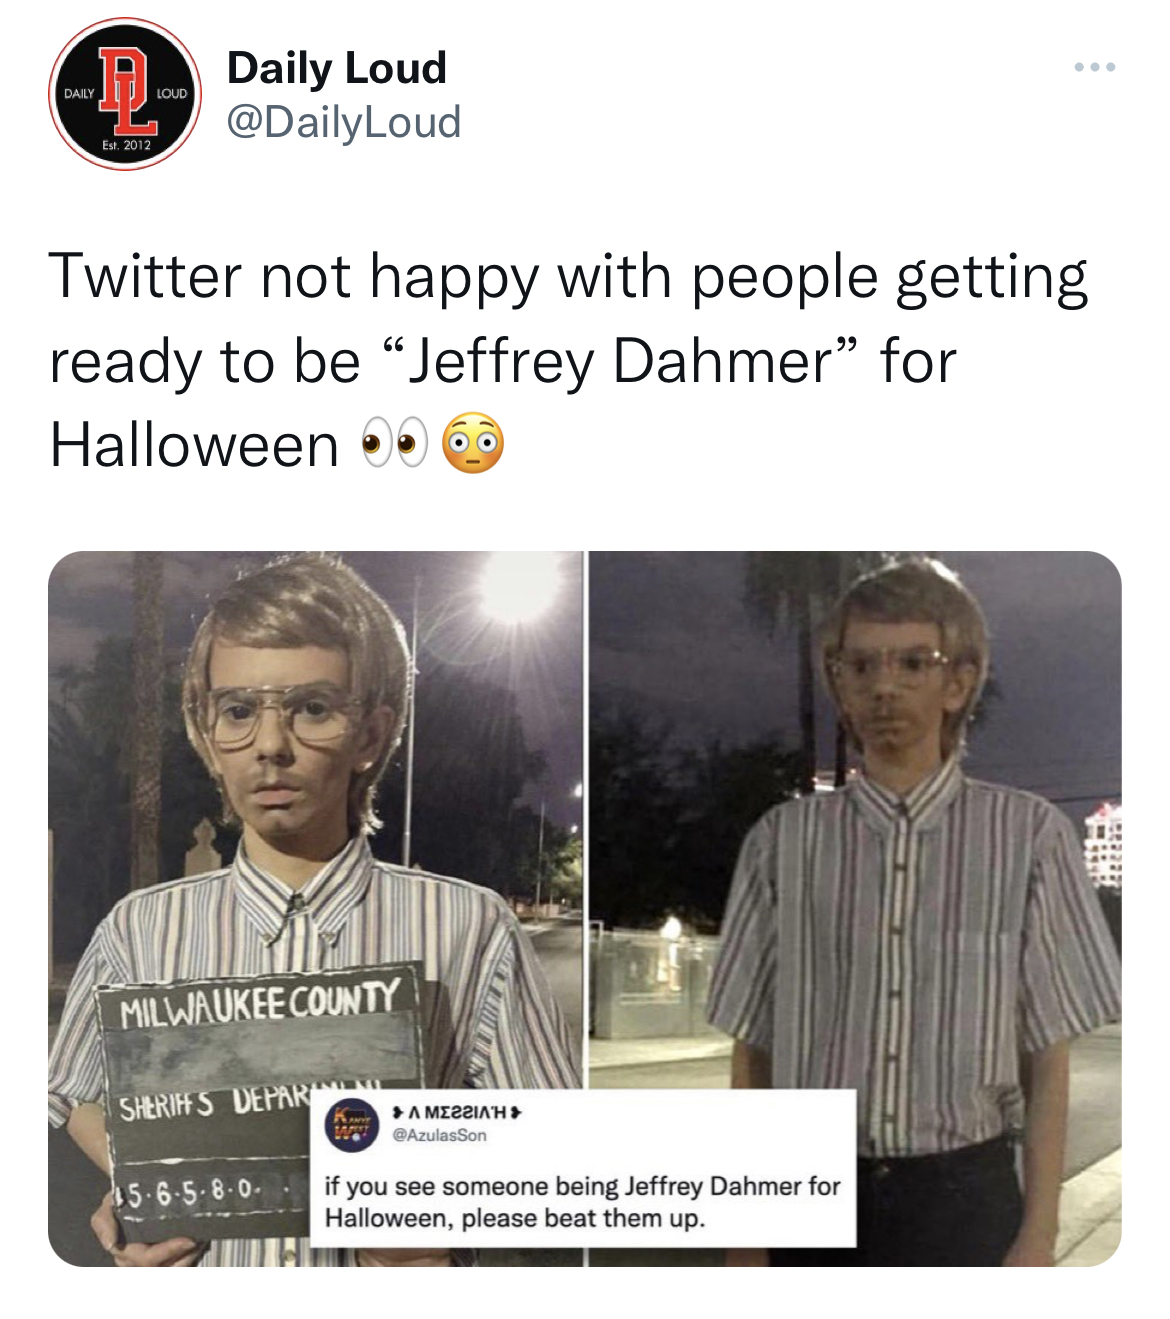 Bro who is dressing their child up as Jeff Dahmer lol.